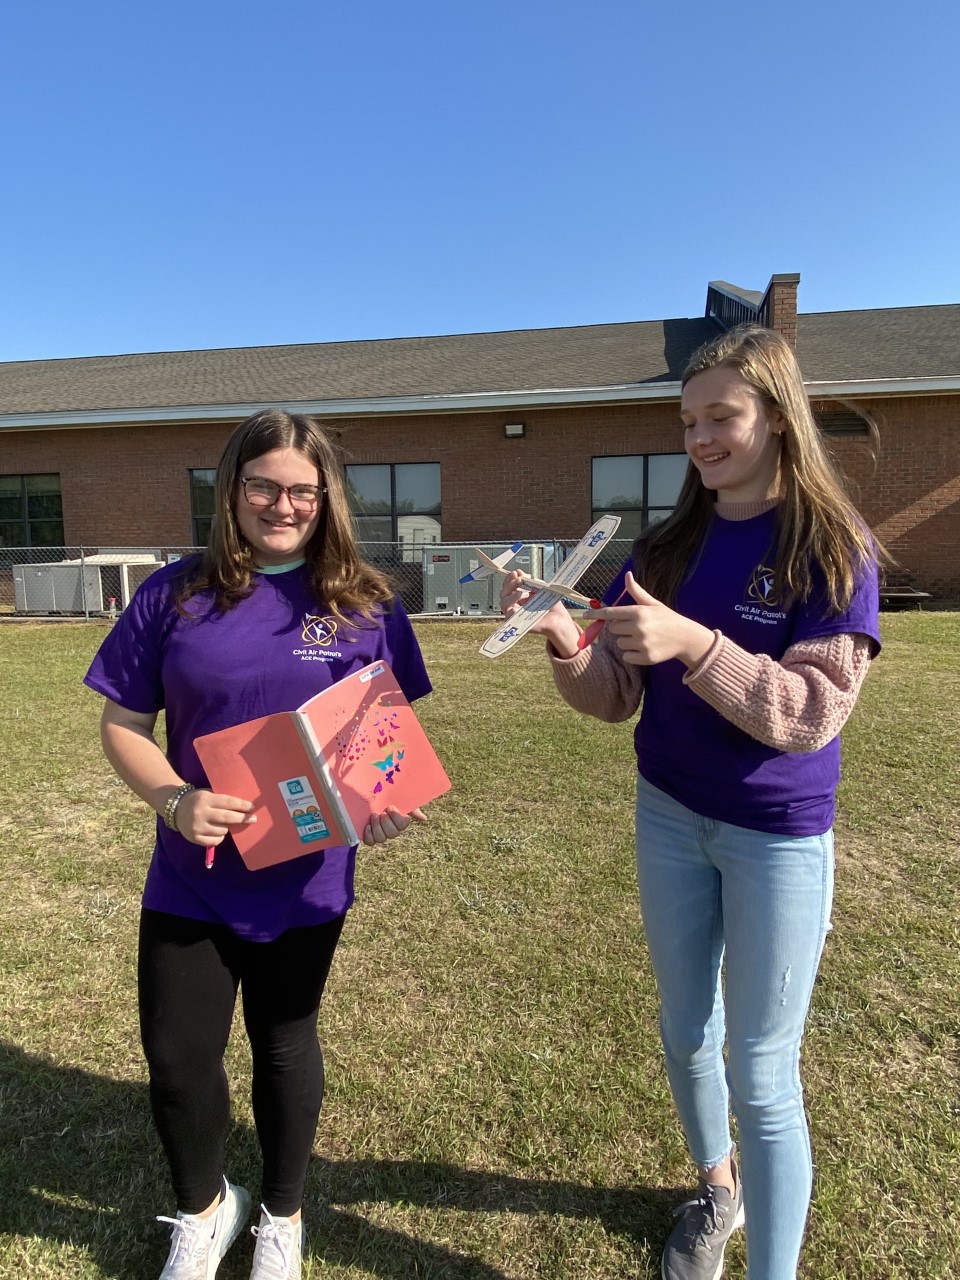 Two students are outside the school preparing to fly their balsa model airplanes